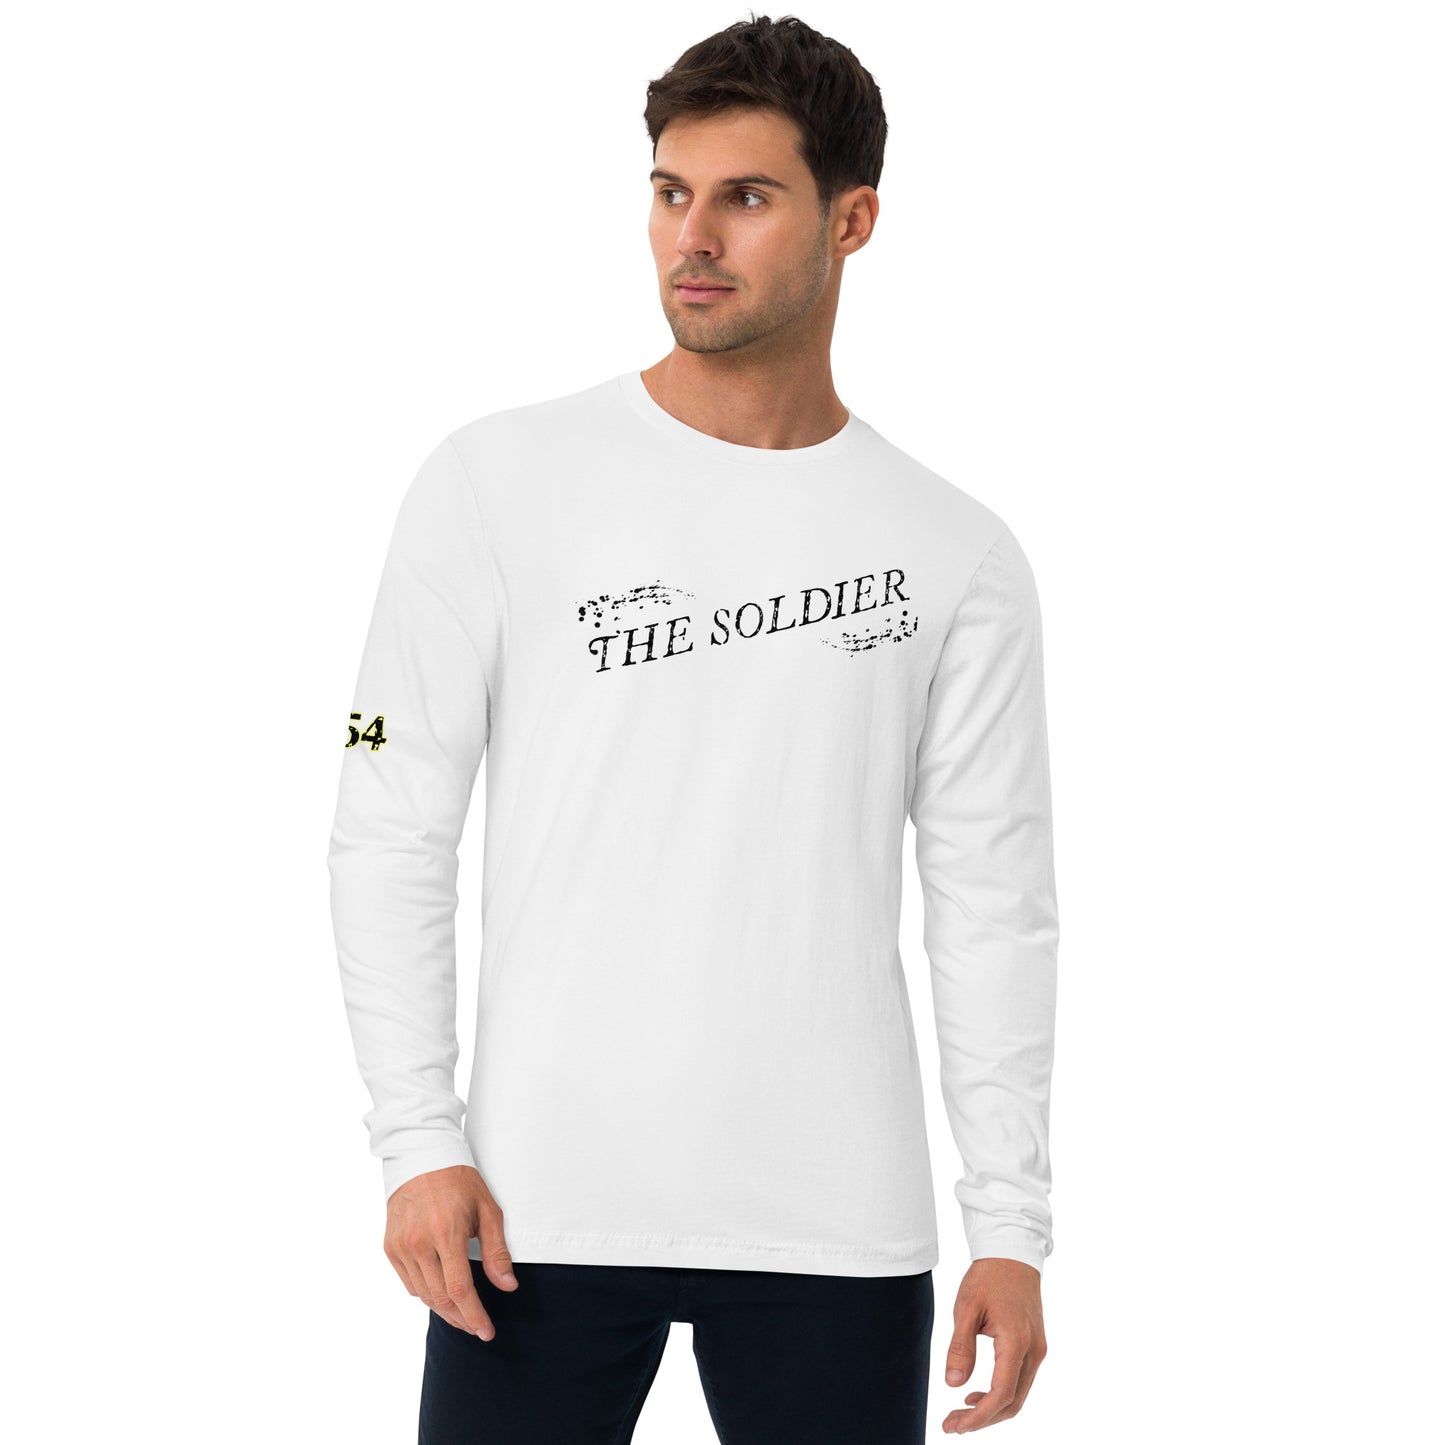 The Soldier 954 Signature Long Sleeve Fitted Crew